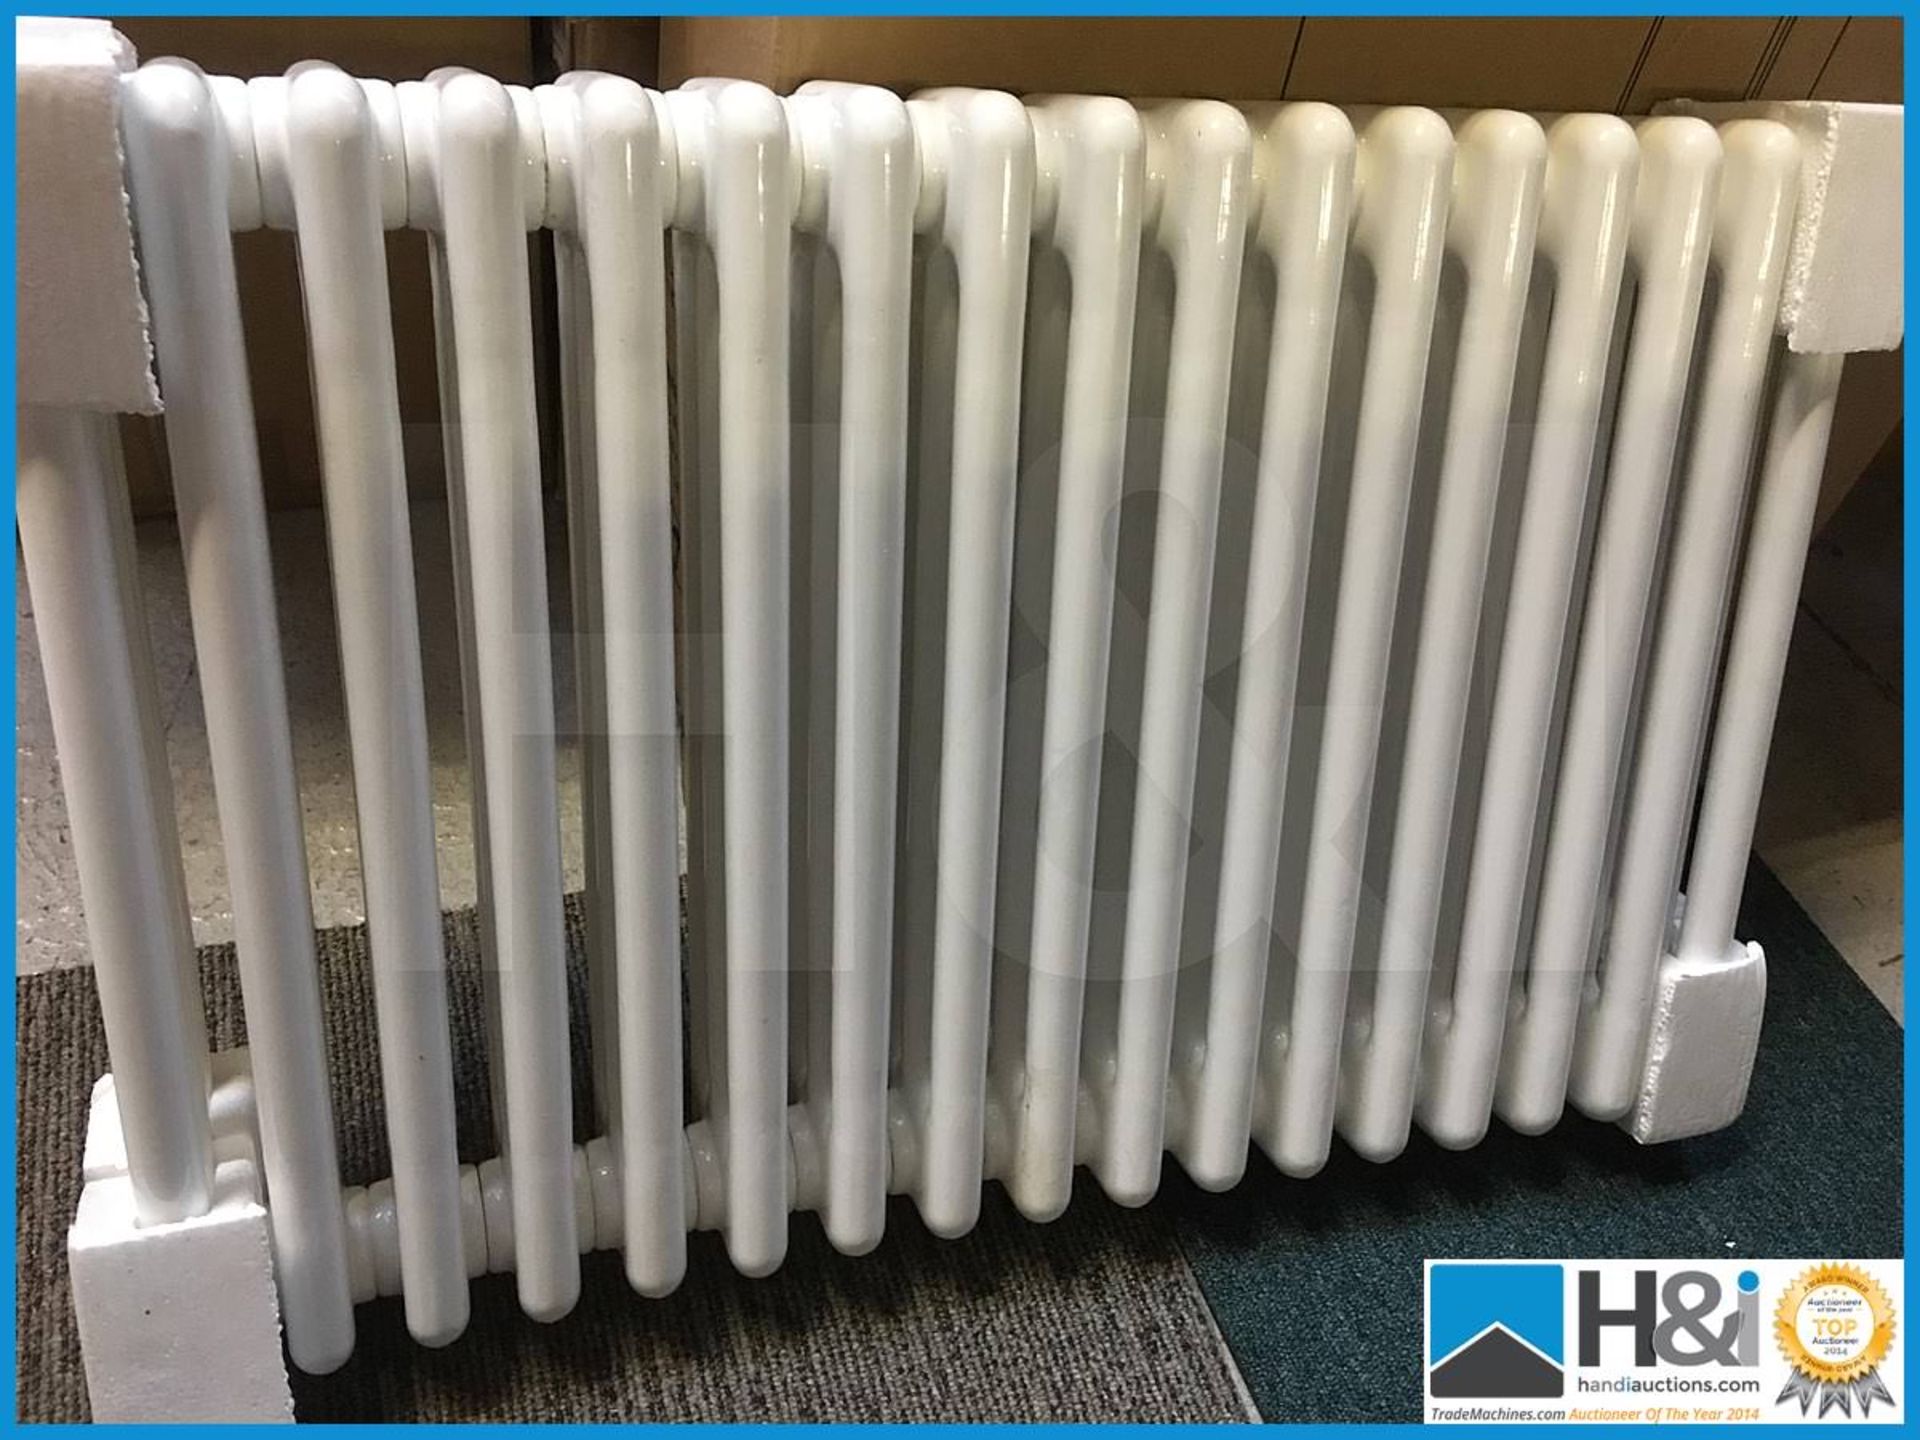 Stunning designer traditional style 3 column radiator in white finish. 750x600. Includes end caps - Image 4 of 4